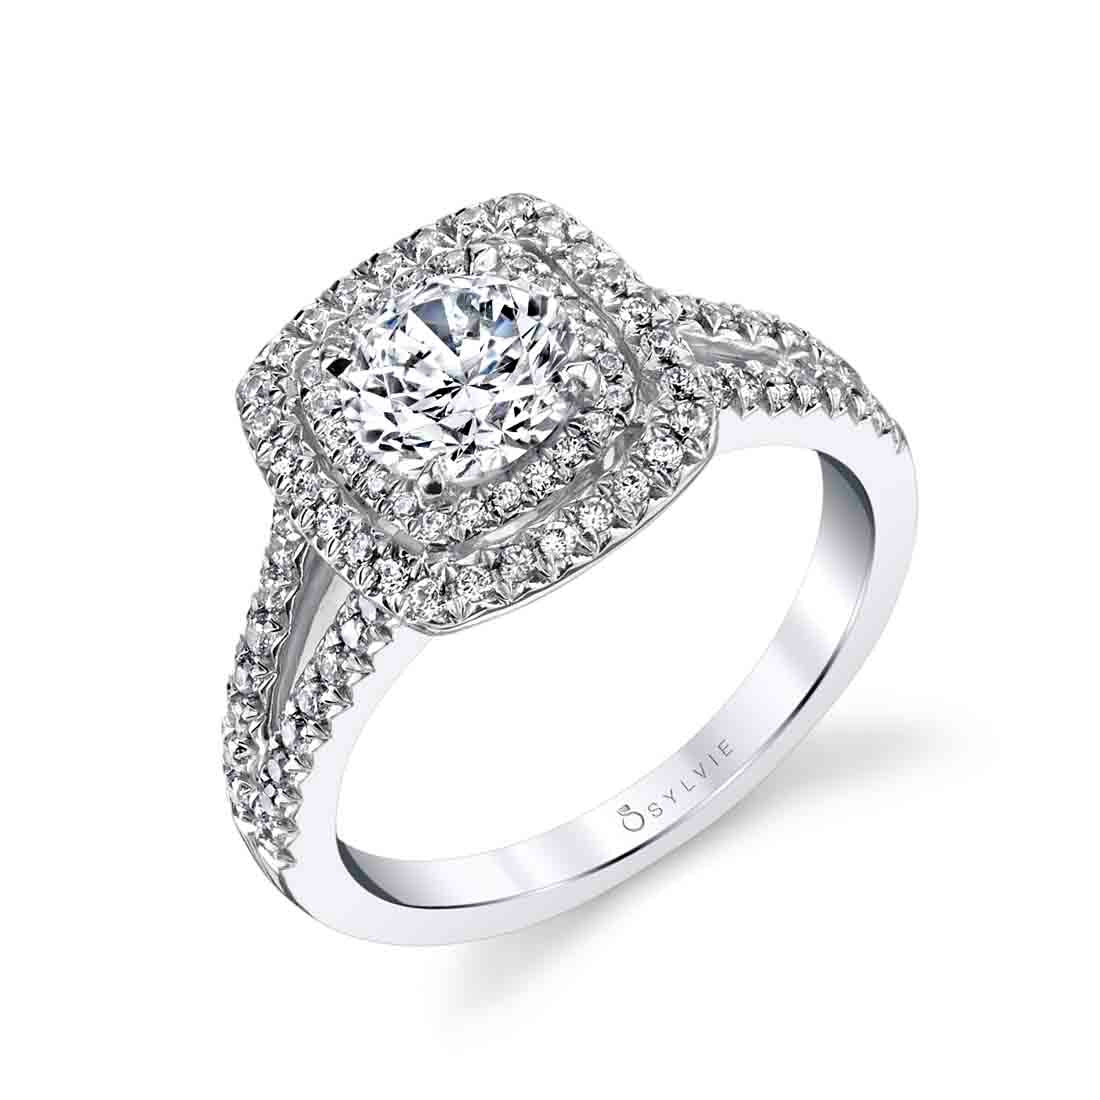 Sylvie Collection Engagement Ring